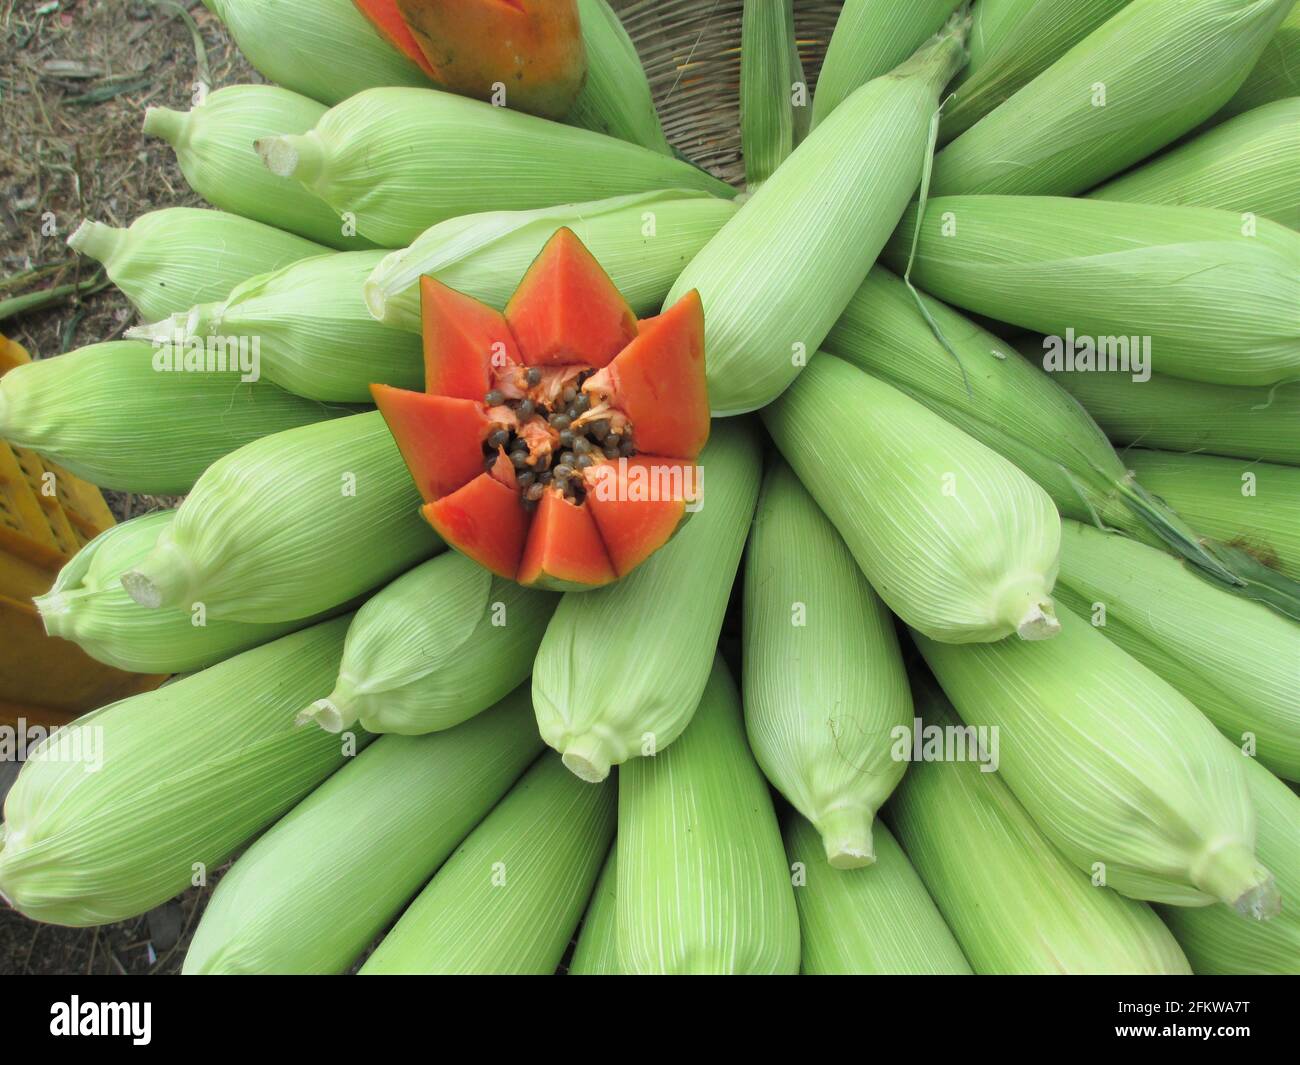 view of half cut papaya fruit with corn for multipurpose use Stock Photo